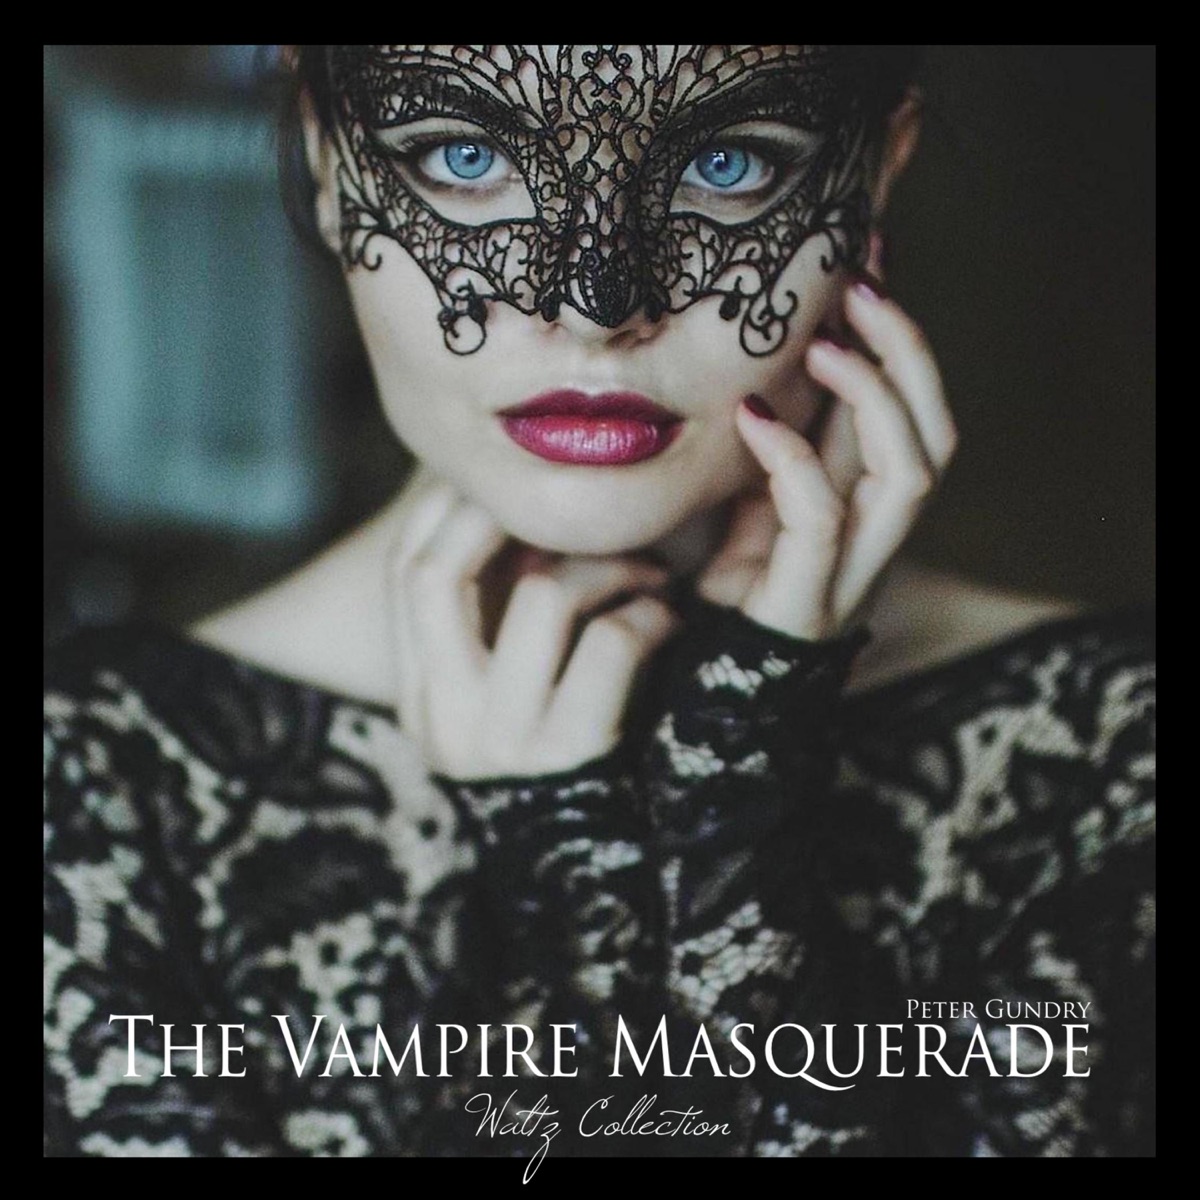 The Vampire Masquerade' by Peter Gundry – A Singular Soundtrack by